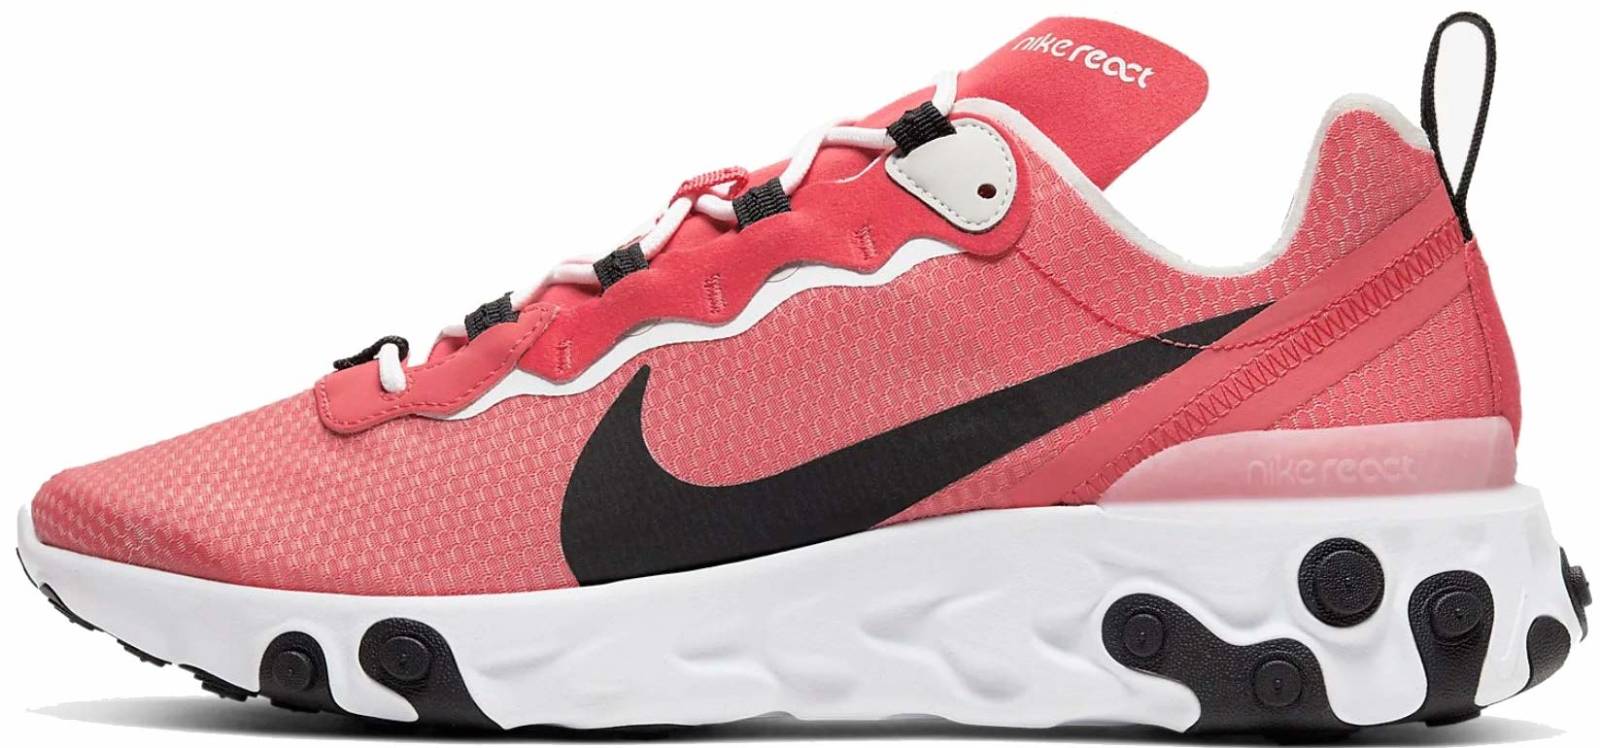 pink and white nikes